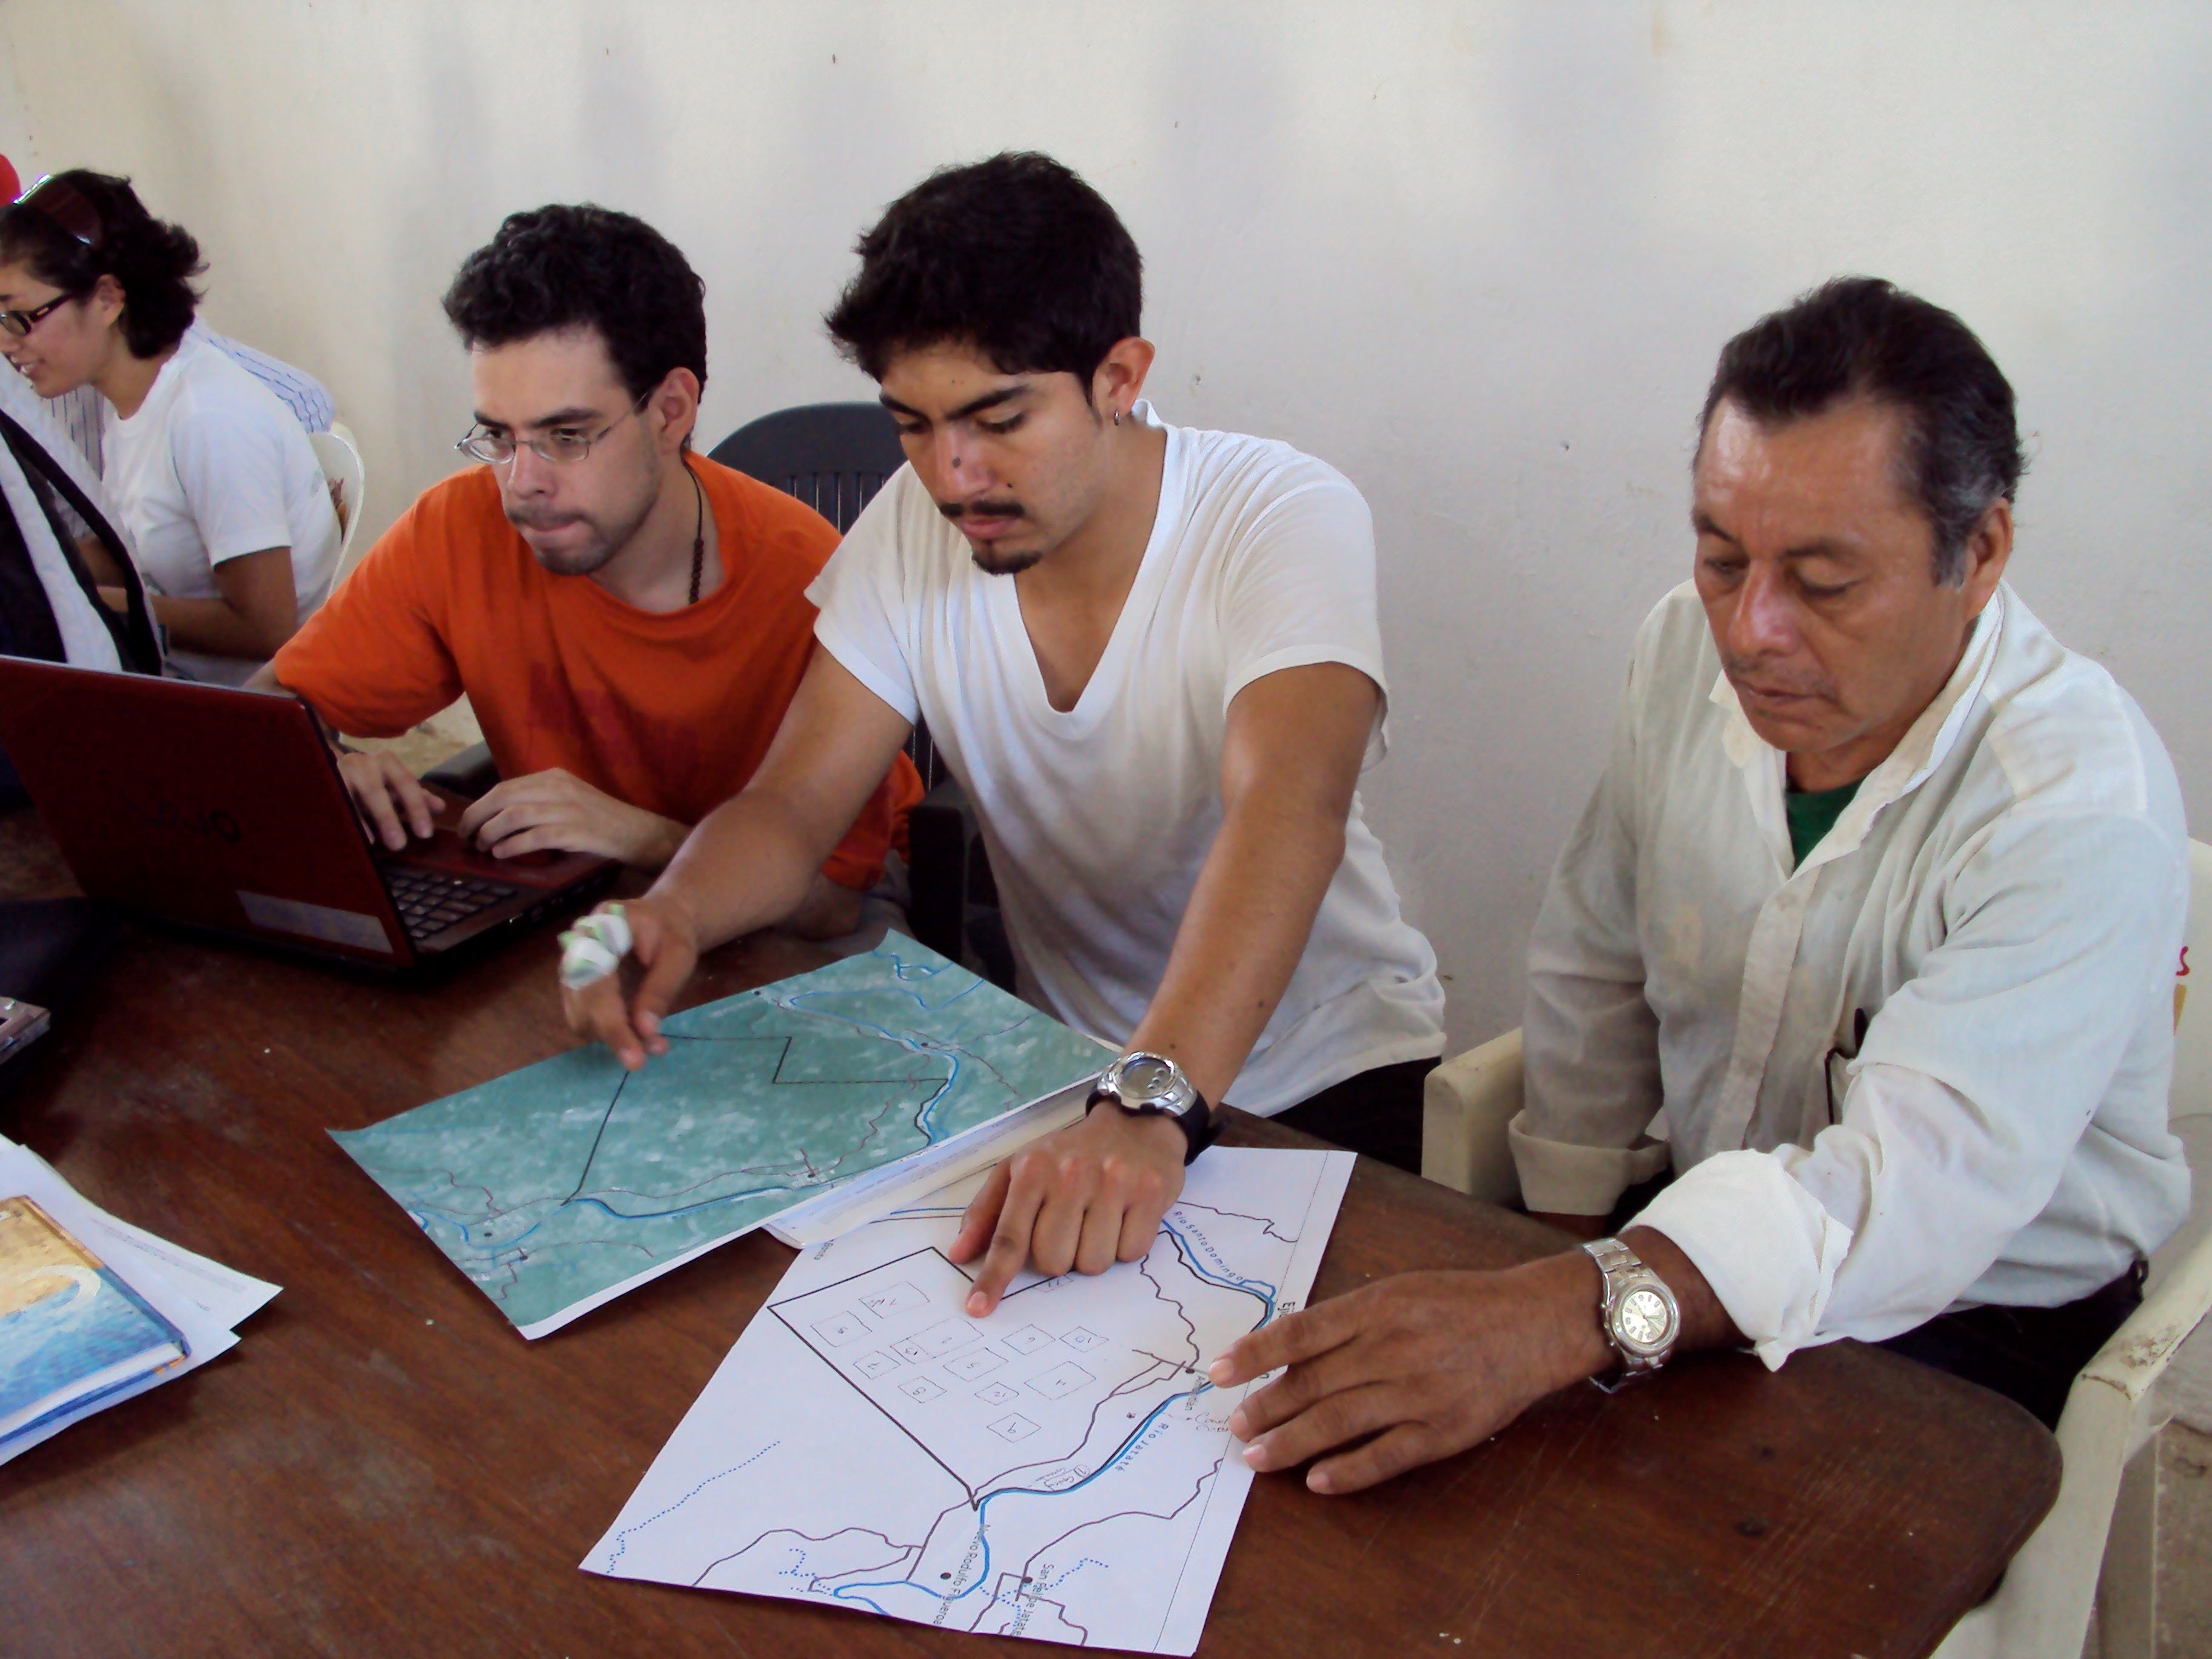 Three men, Talib among them, are seated at a table and looking at maps in front of them.